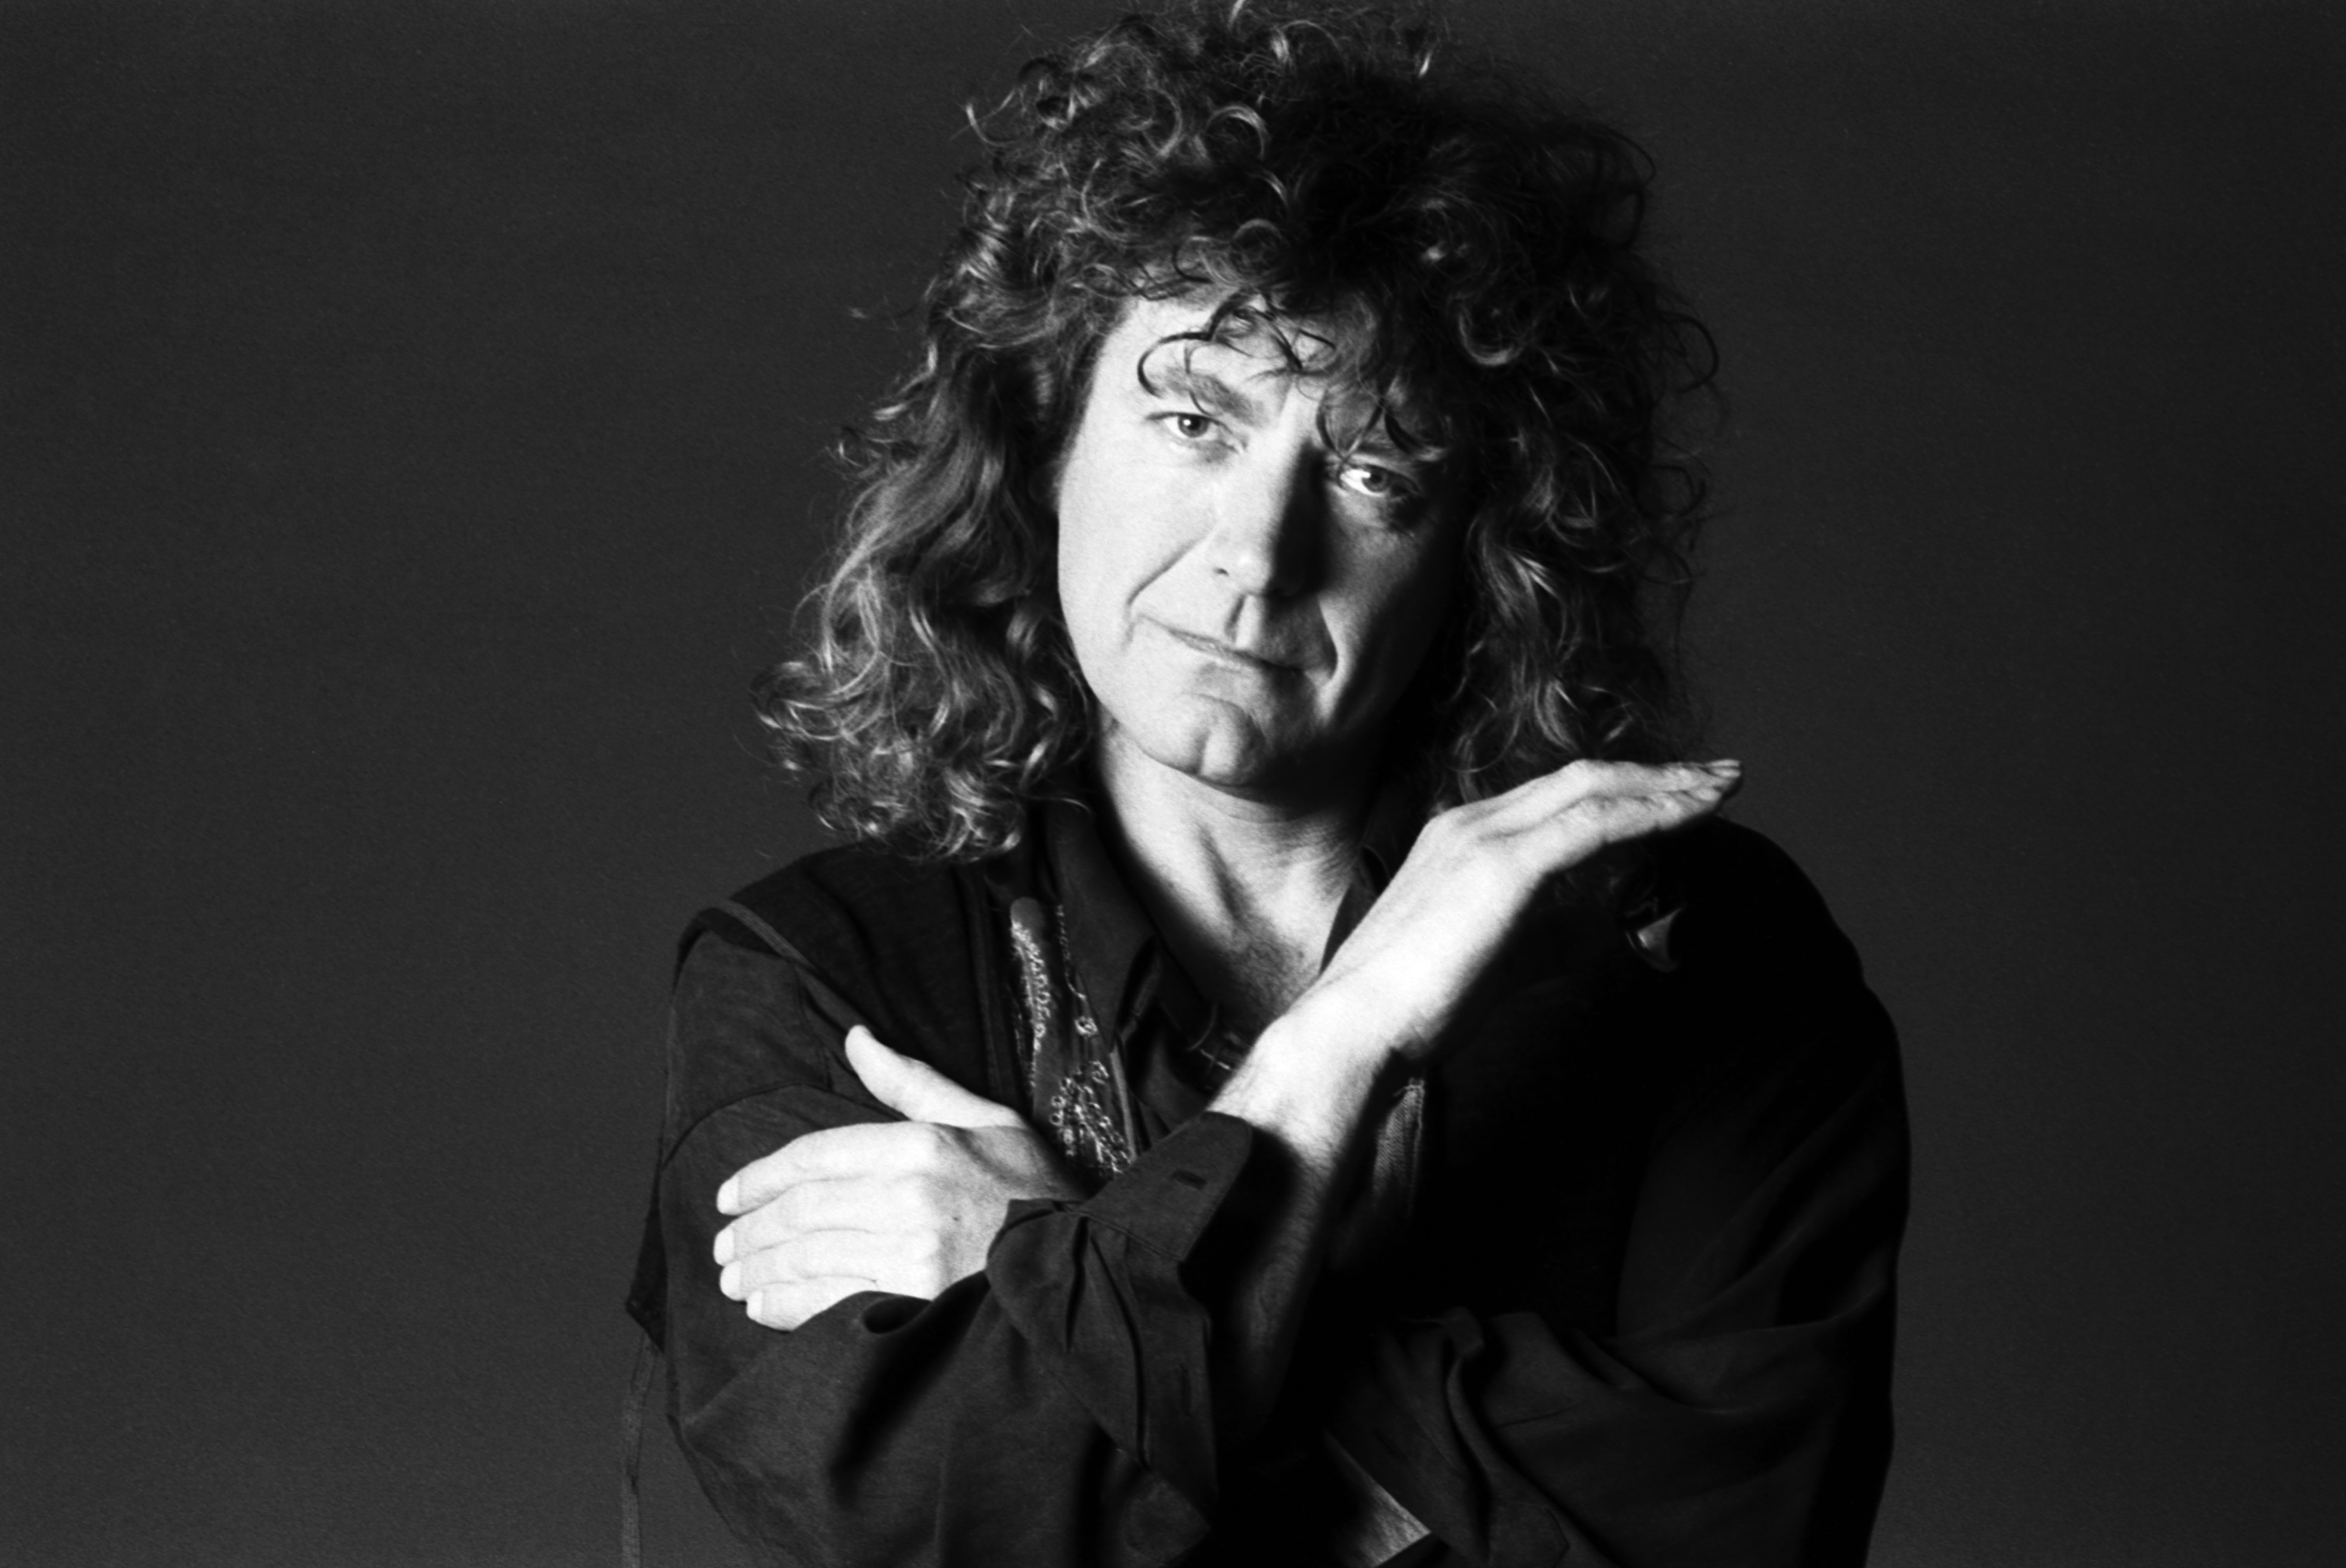 Robert Plant of Led Zeppelin Photographed By David Gahr